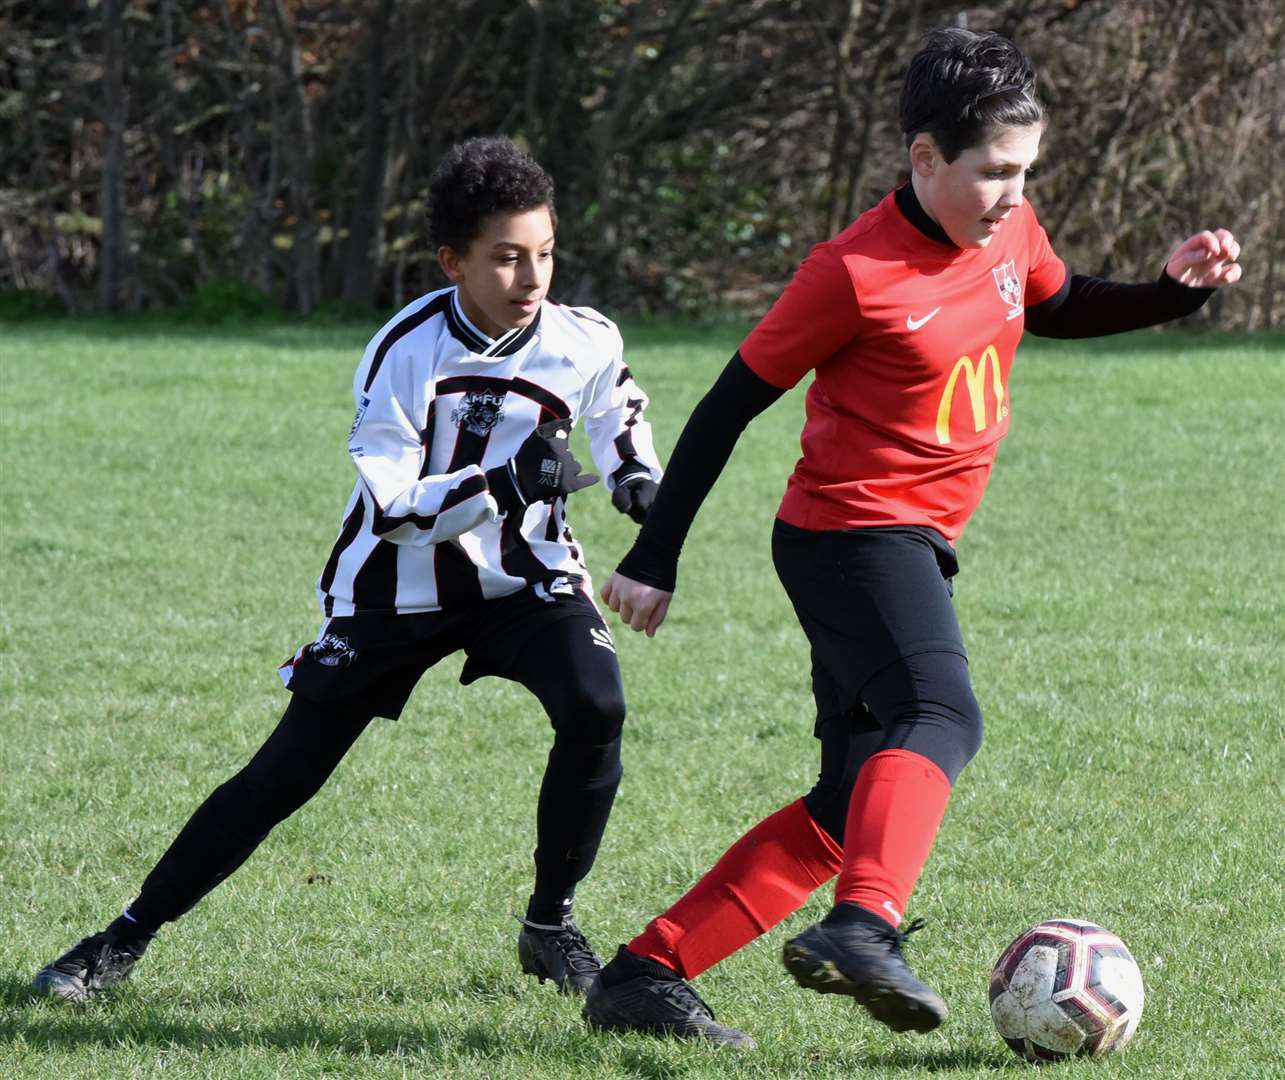 Thamesview under-12s (red) are closed down by Milton & Fulston United under-12s. Picture: Ken Mears FM30535435